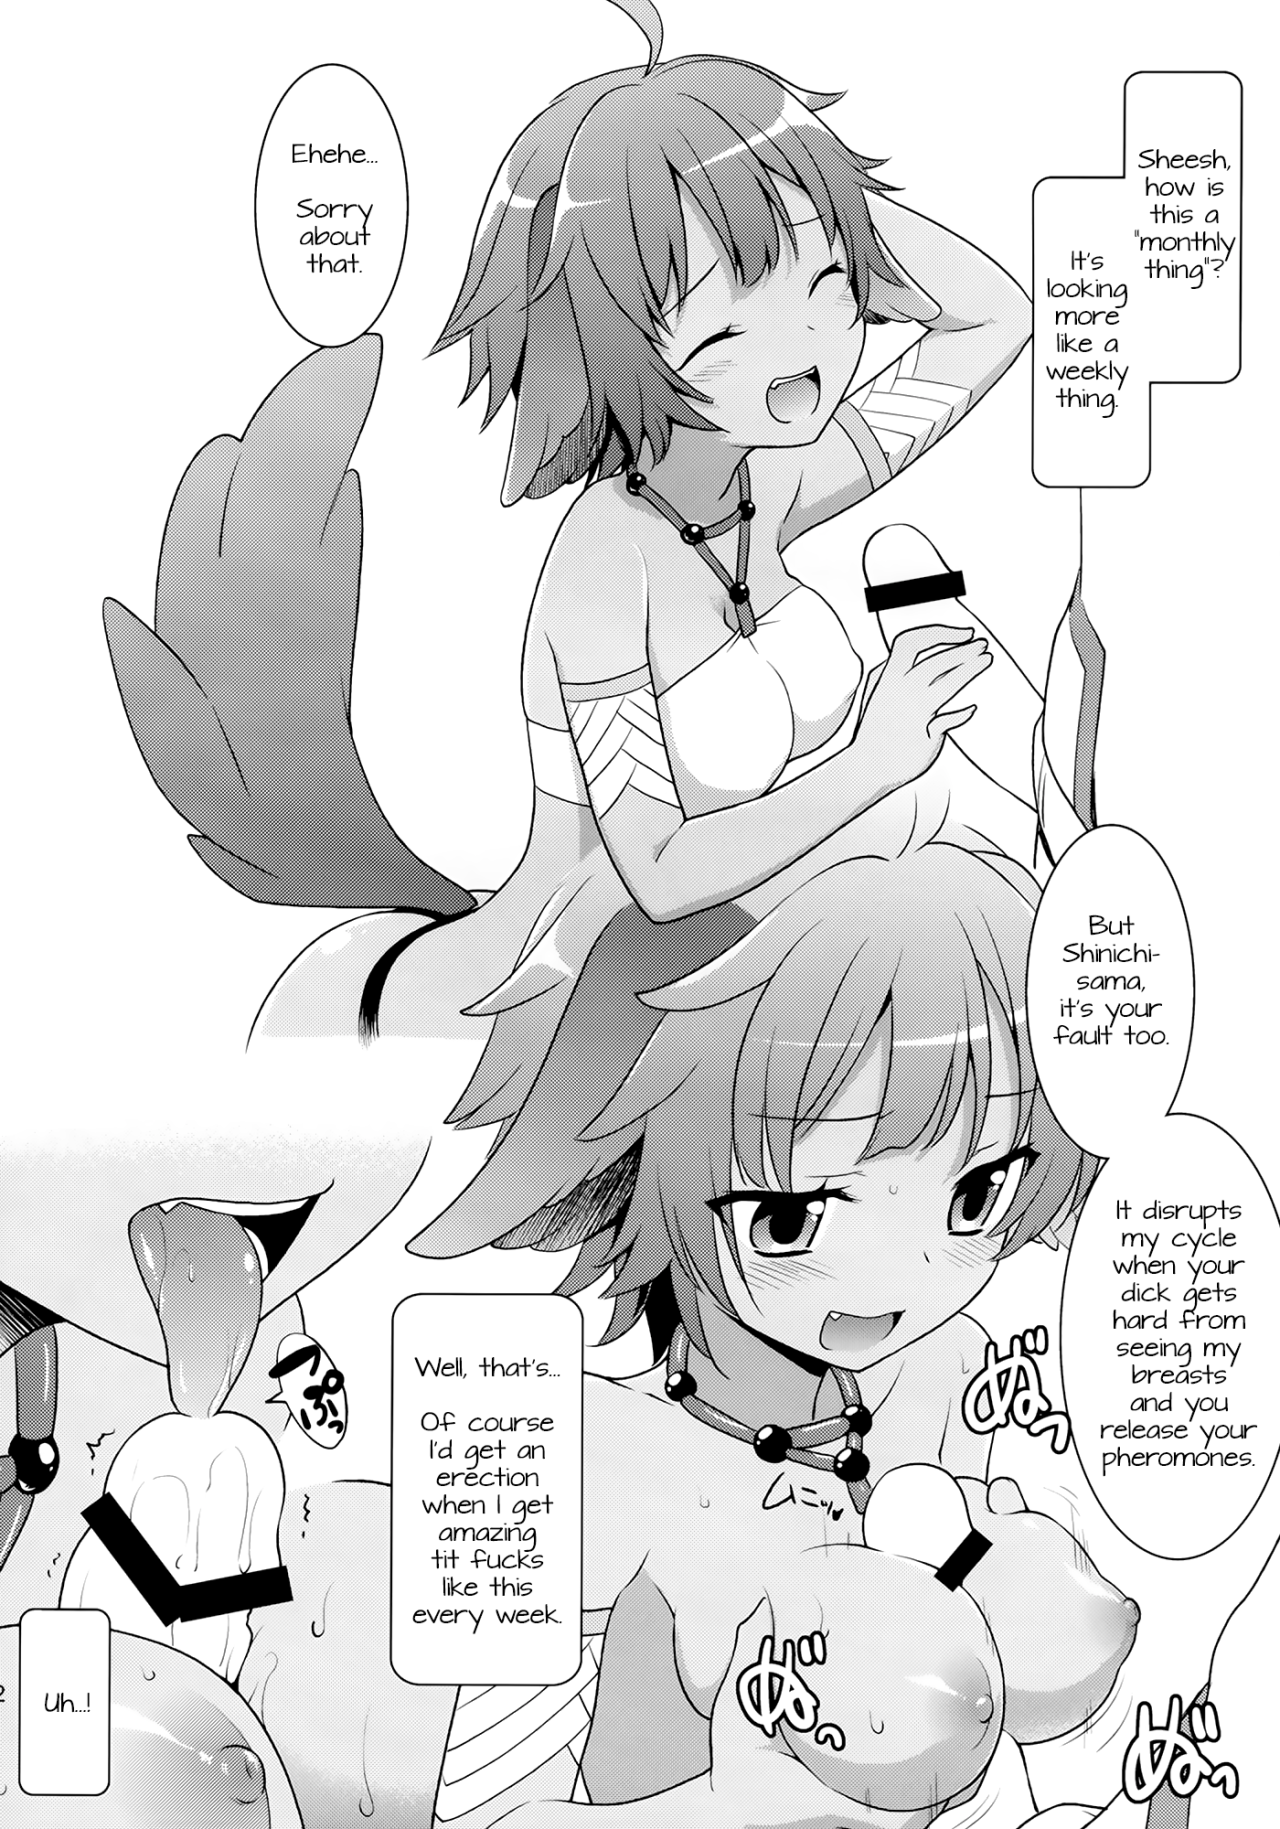  An excerpt from the Technobreak Company doujin featuring Elbia Hanaiman the cute